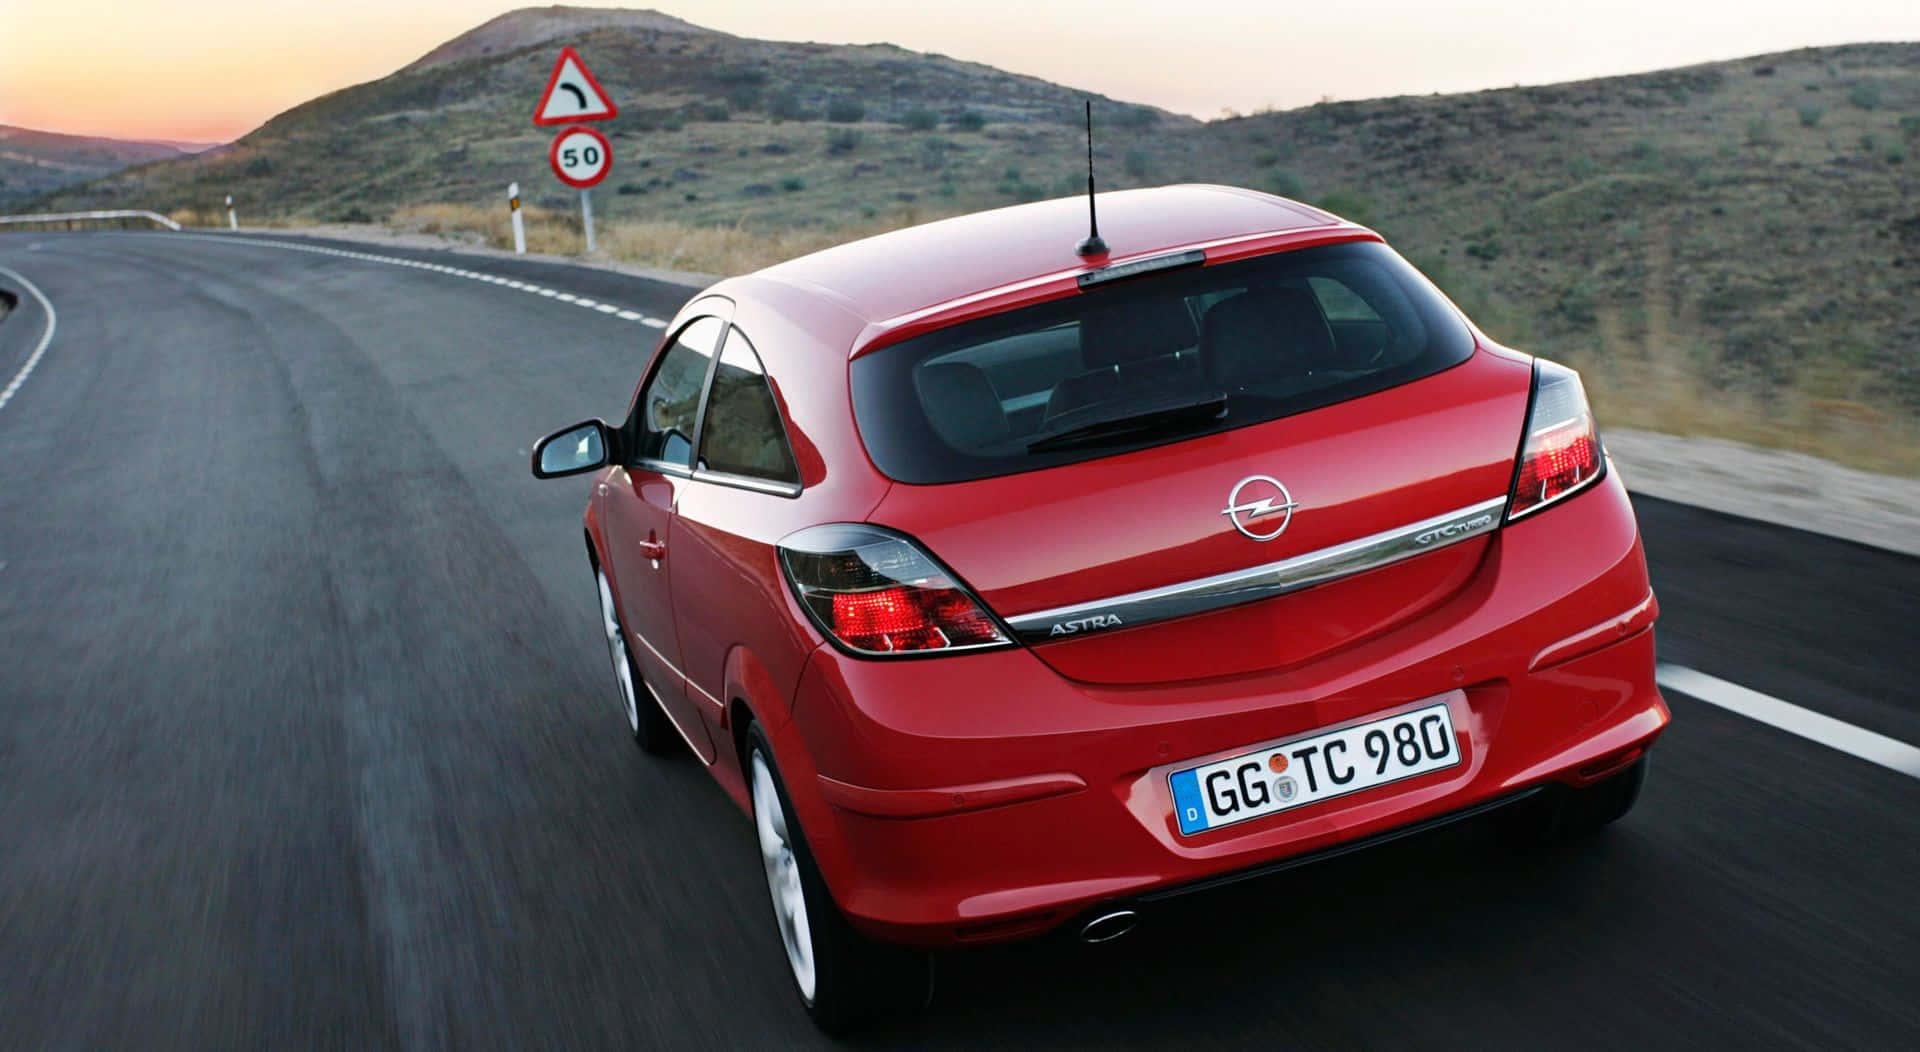 Opel Astra in Stunning High Definition Wallpaper